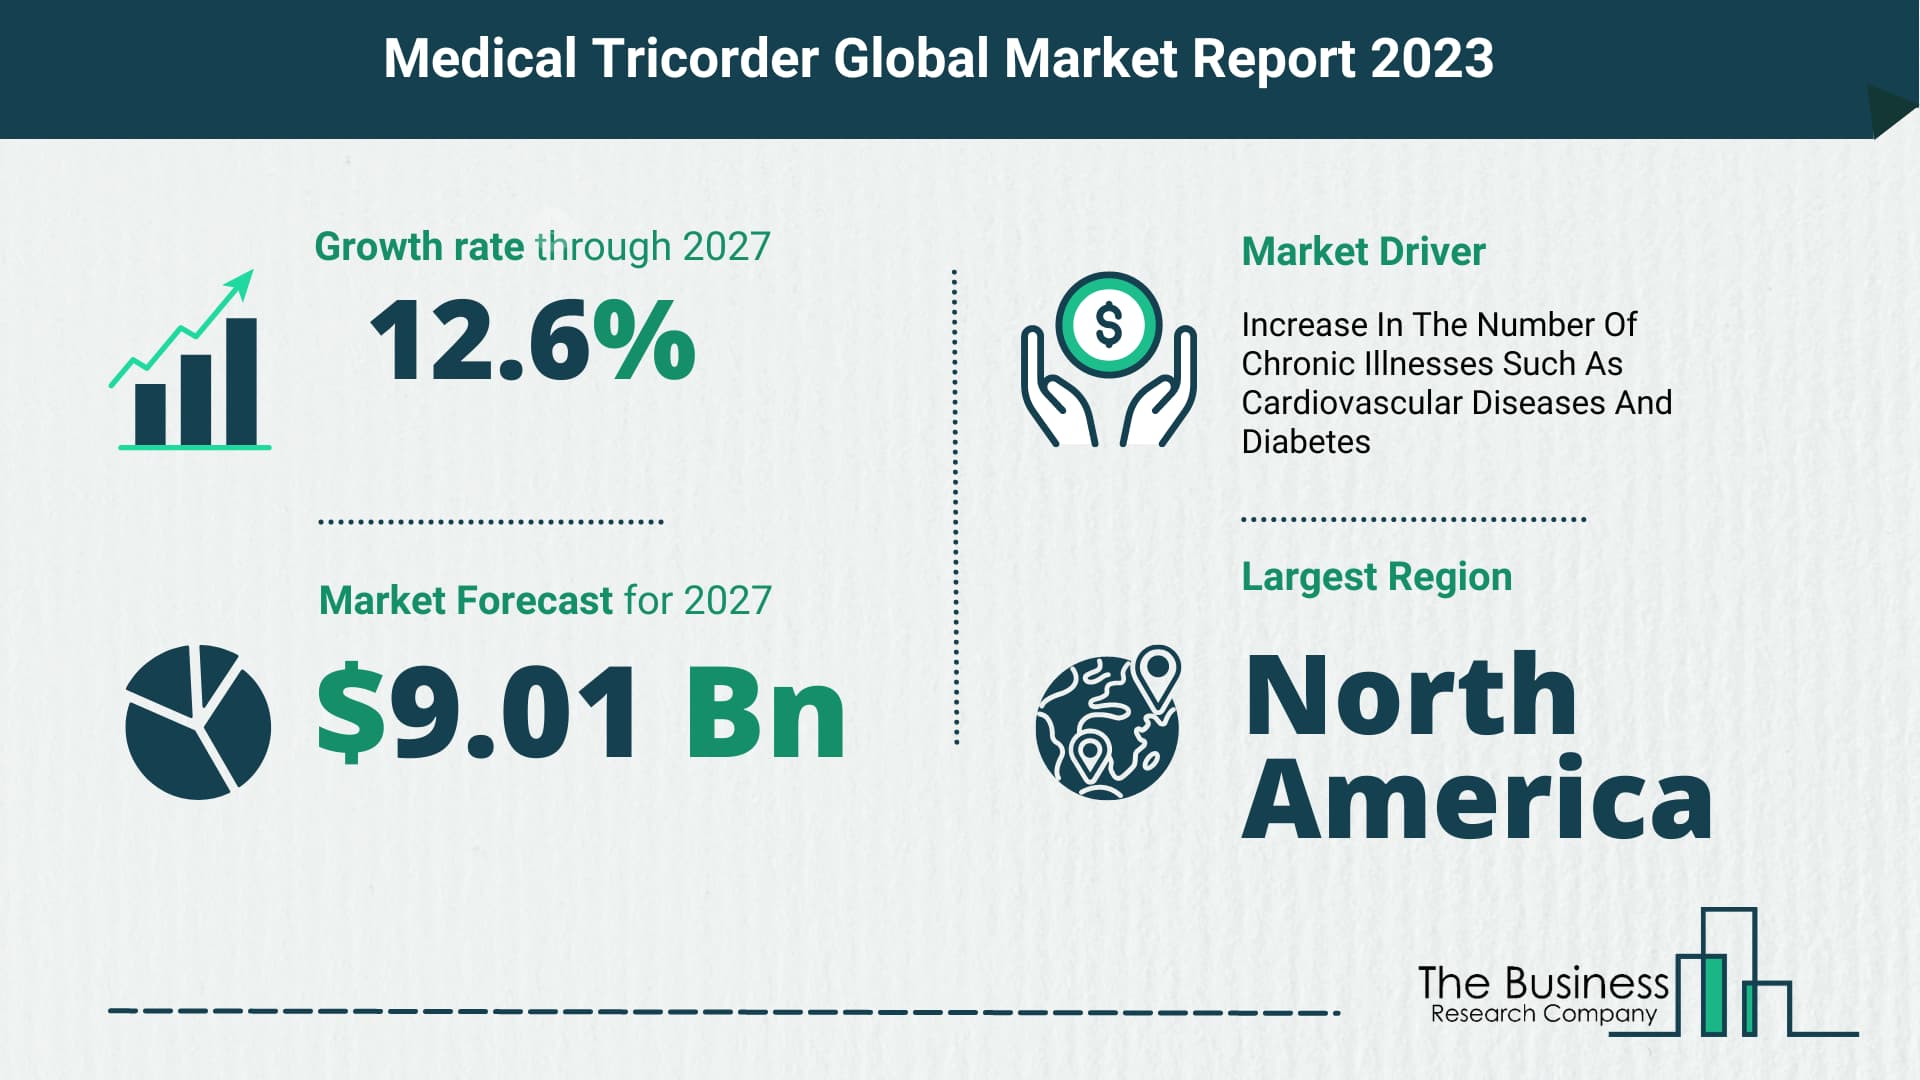 How Will The Medical Tricorder Market Globally Expand In 2023?